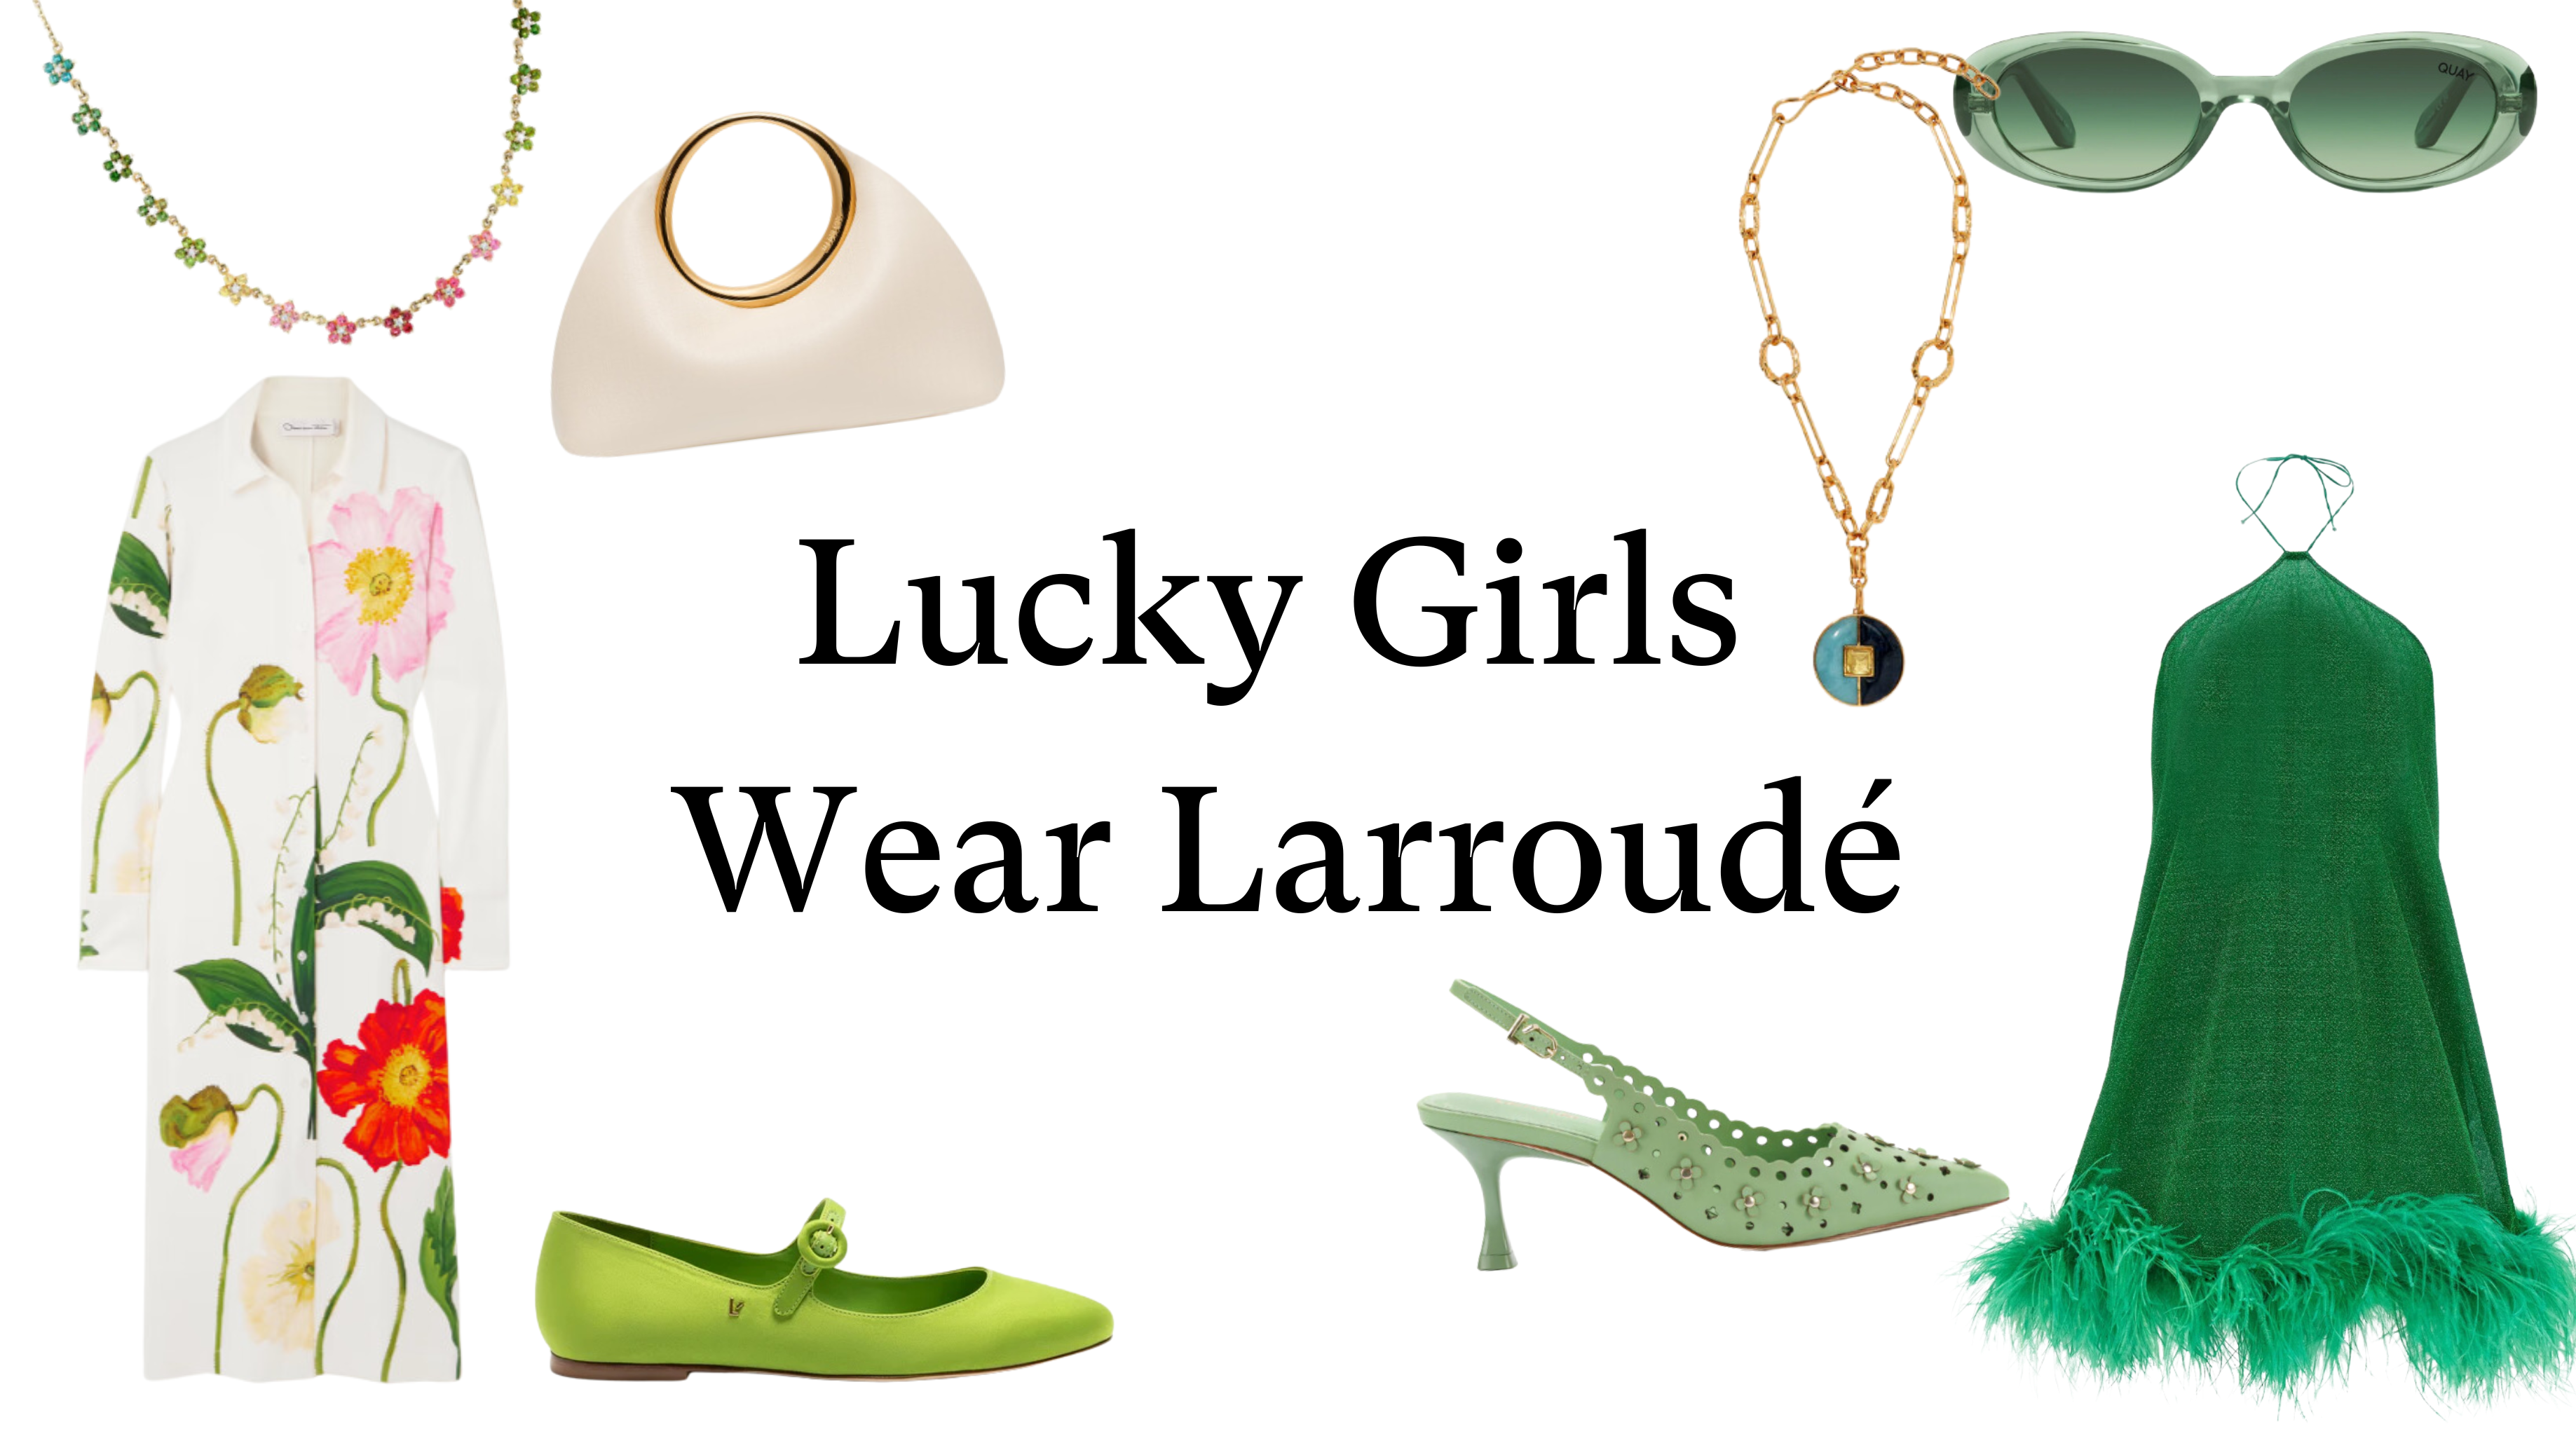 Our St. Patrick's Shopping Guide